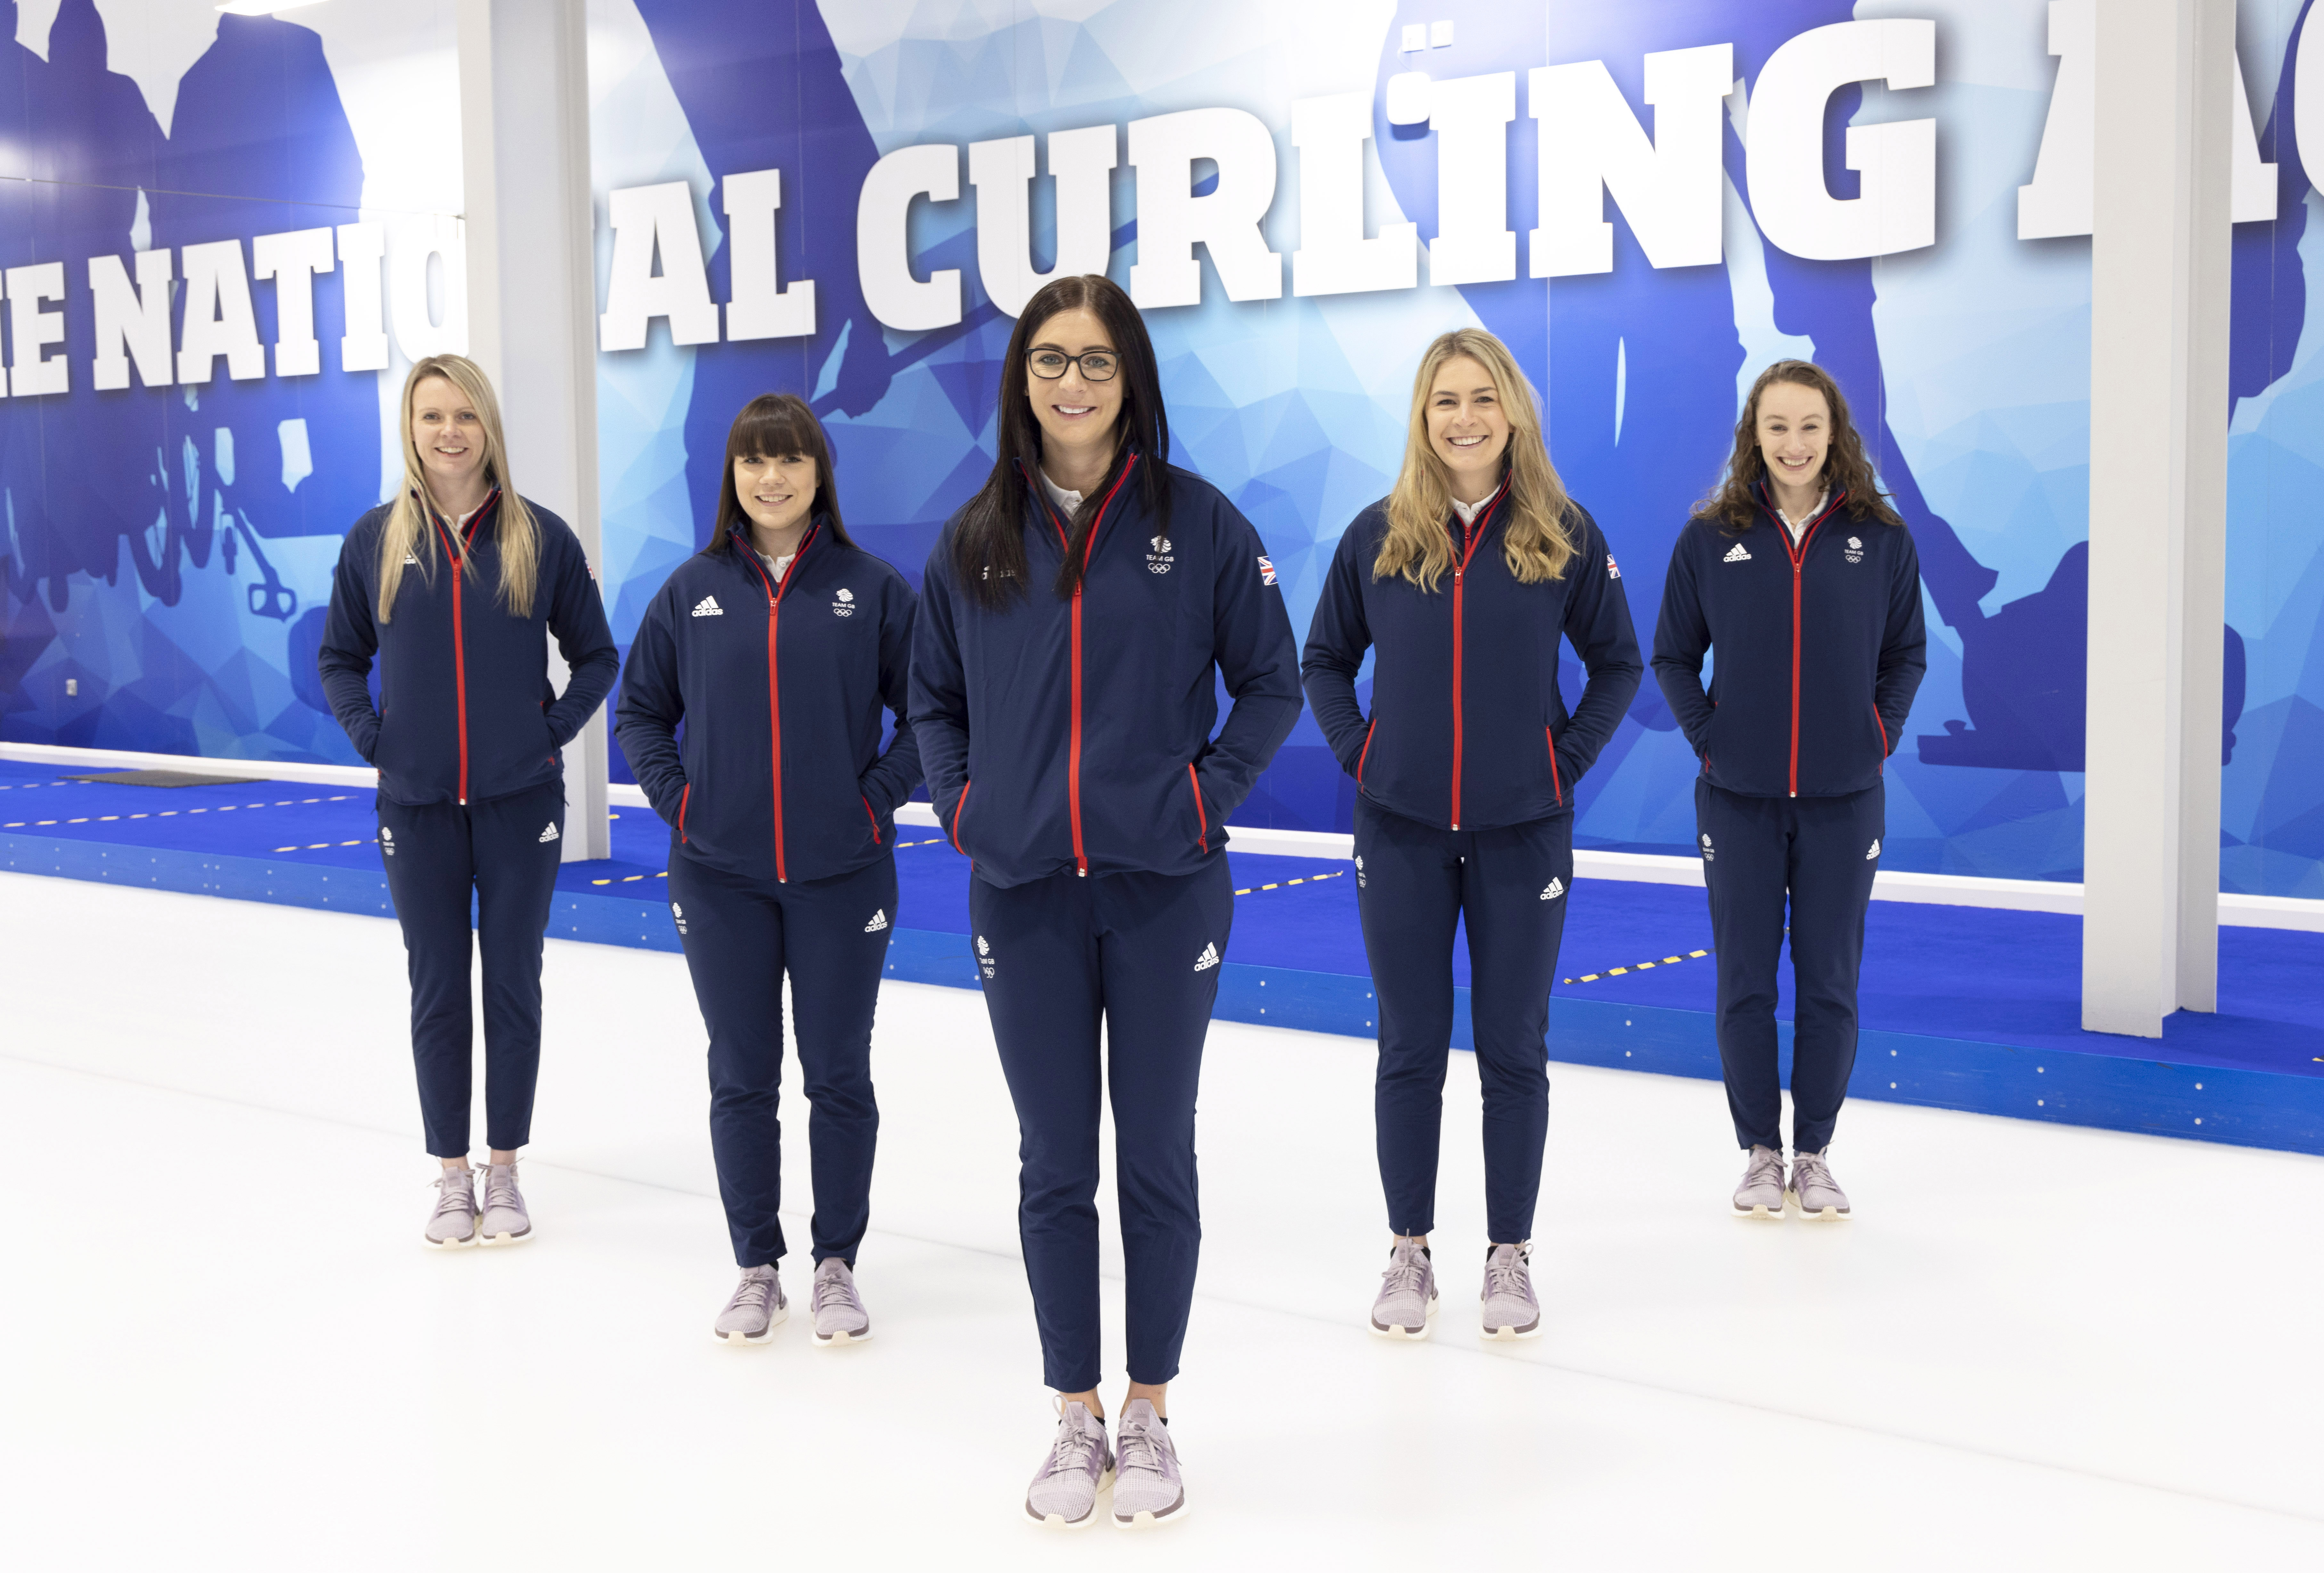 Team GB selects women's curling team for Beijing 2022